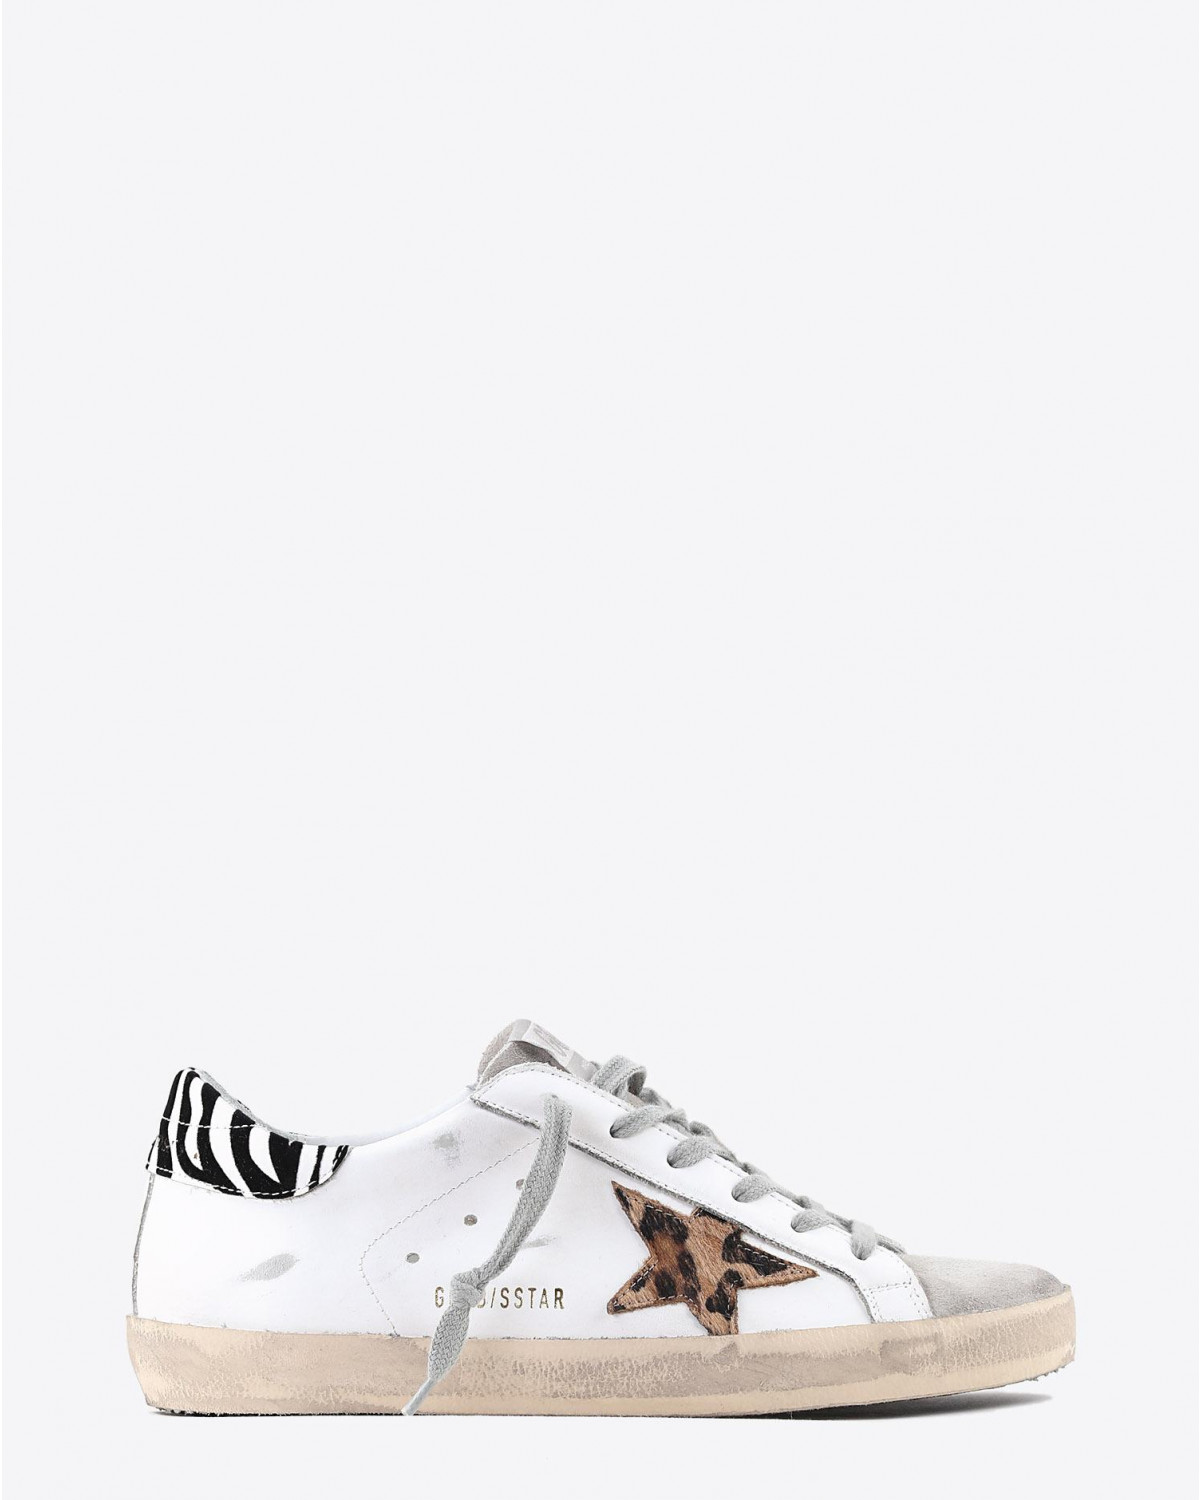 Sneakers Golden Goose Woman Pré-Collection Sneakers Superstar - White Leather - Pony Leo Star - Zigger Details
